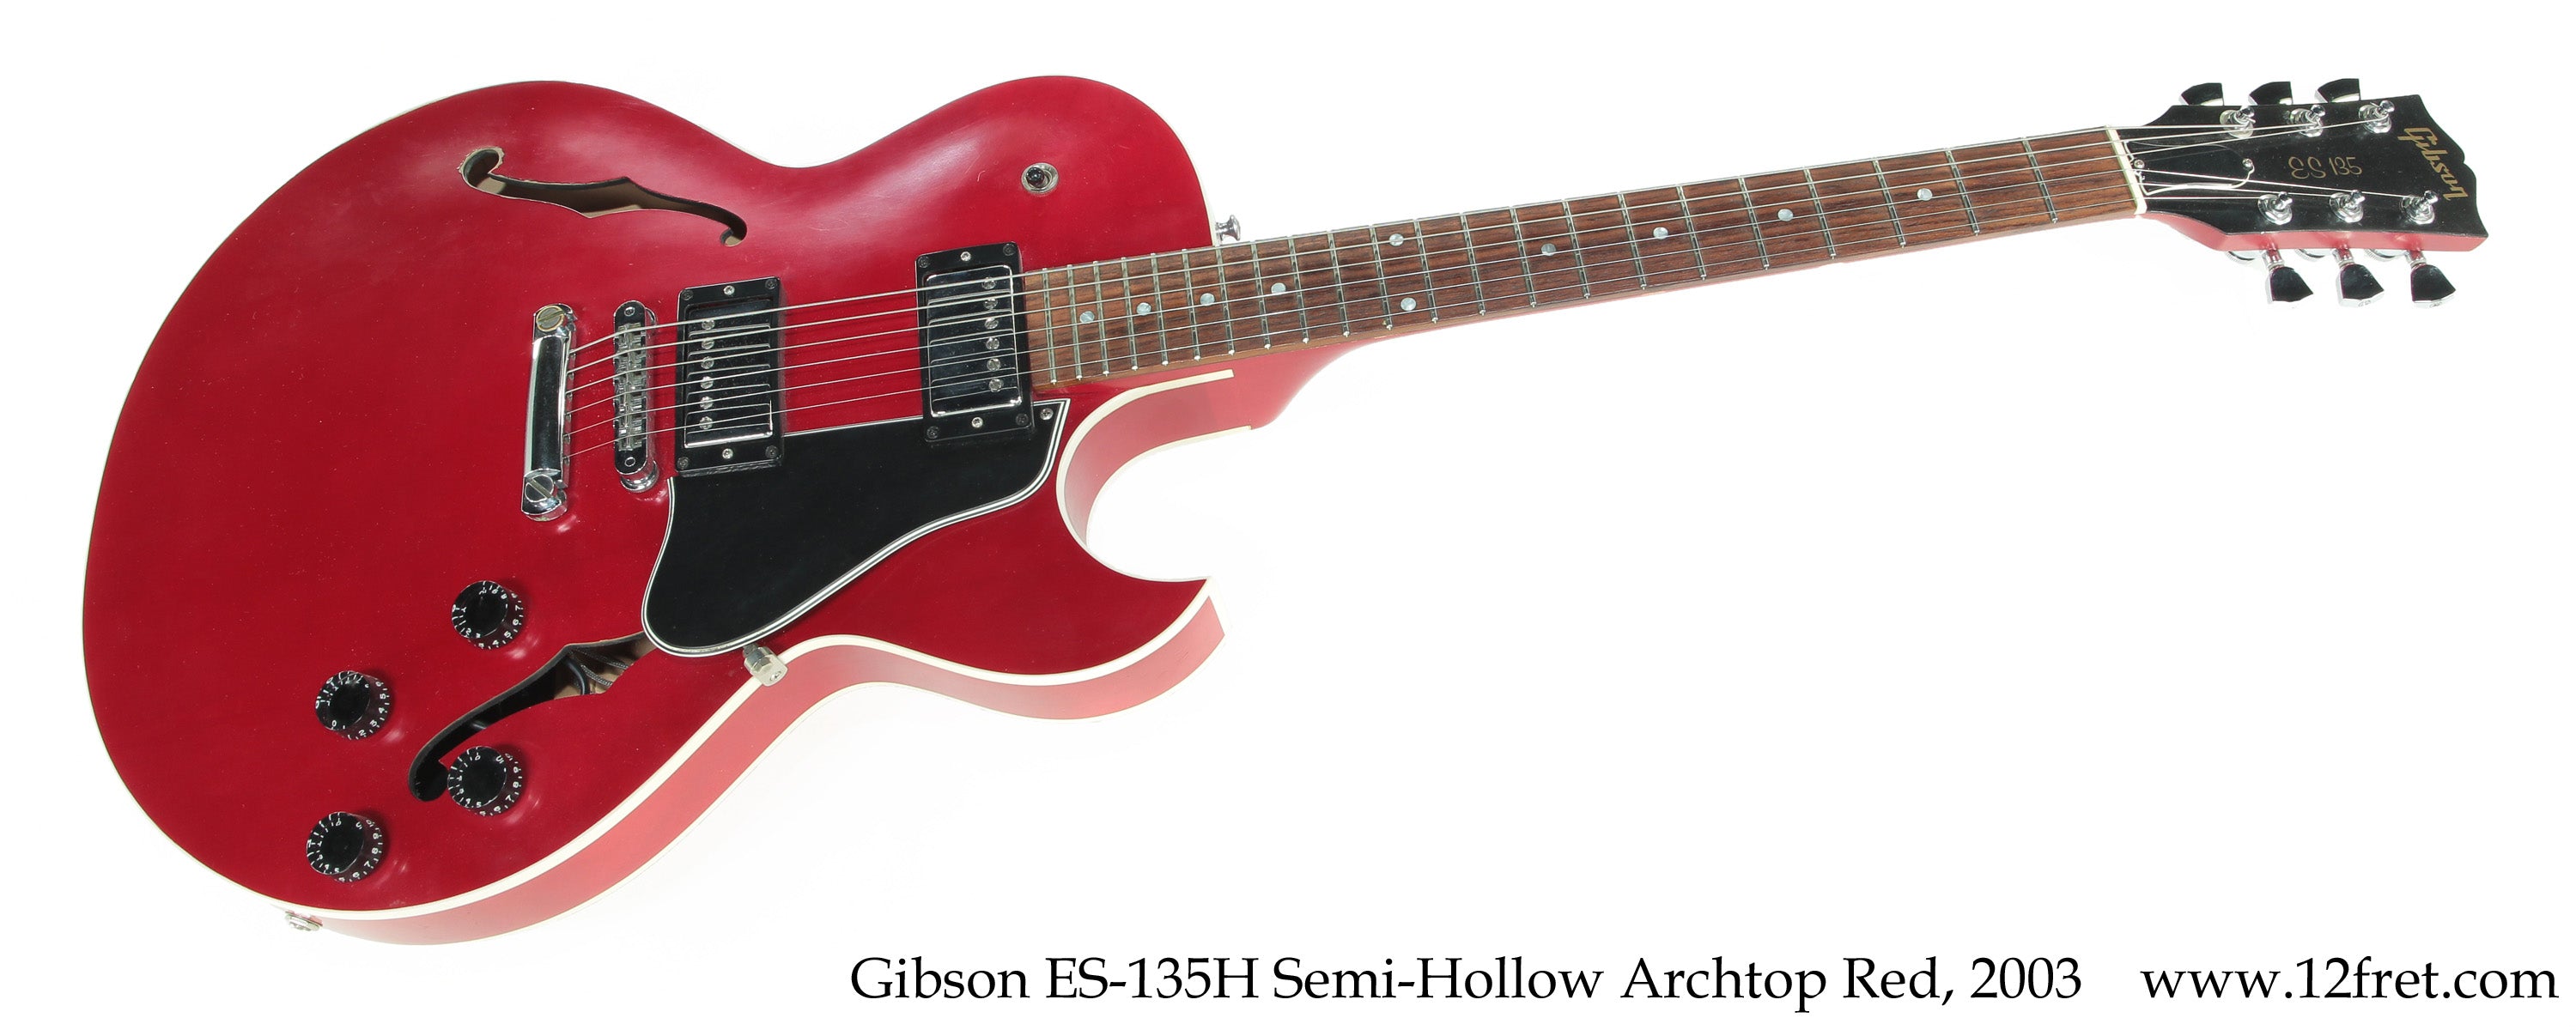 Gibson ES-135H Semi-Hollow Archtop Red, 2003 - The Twelfth Fret